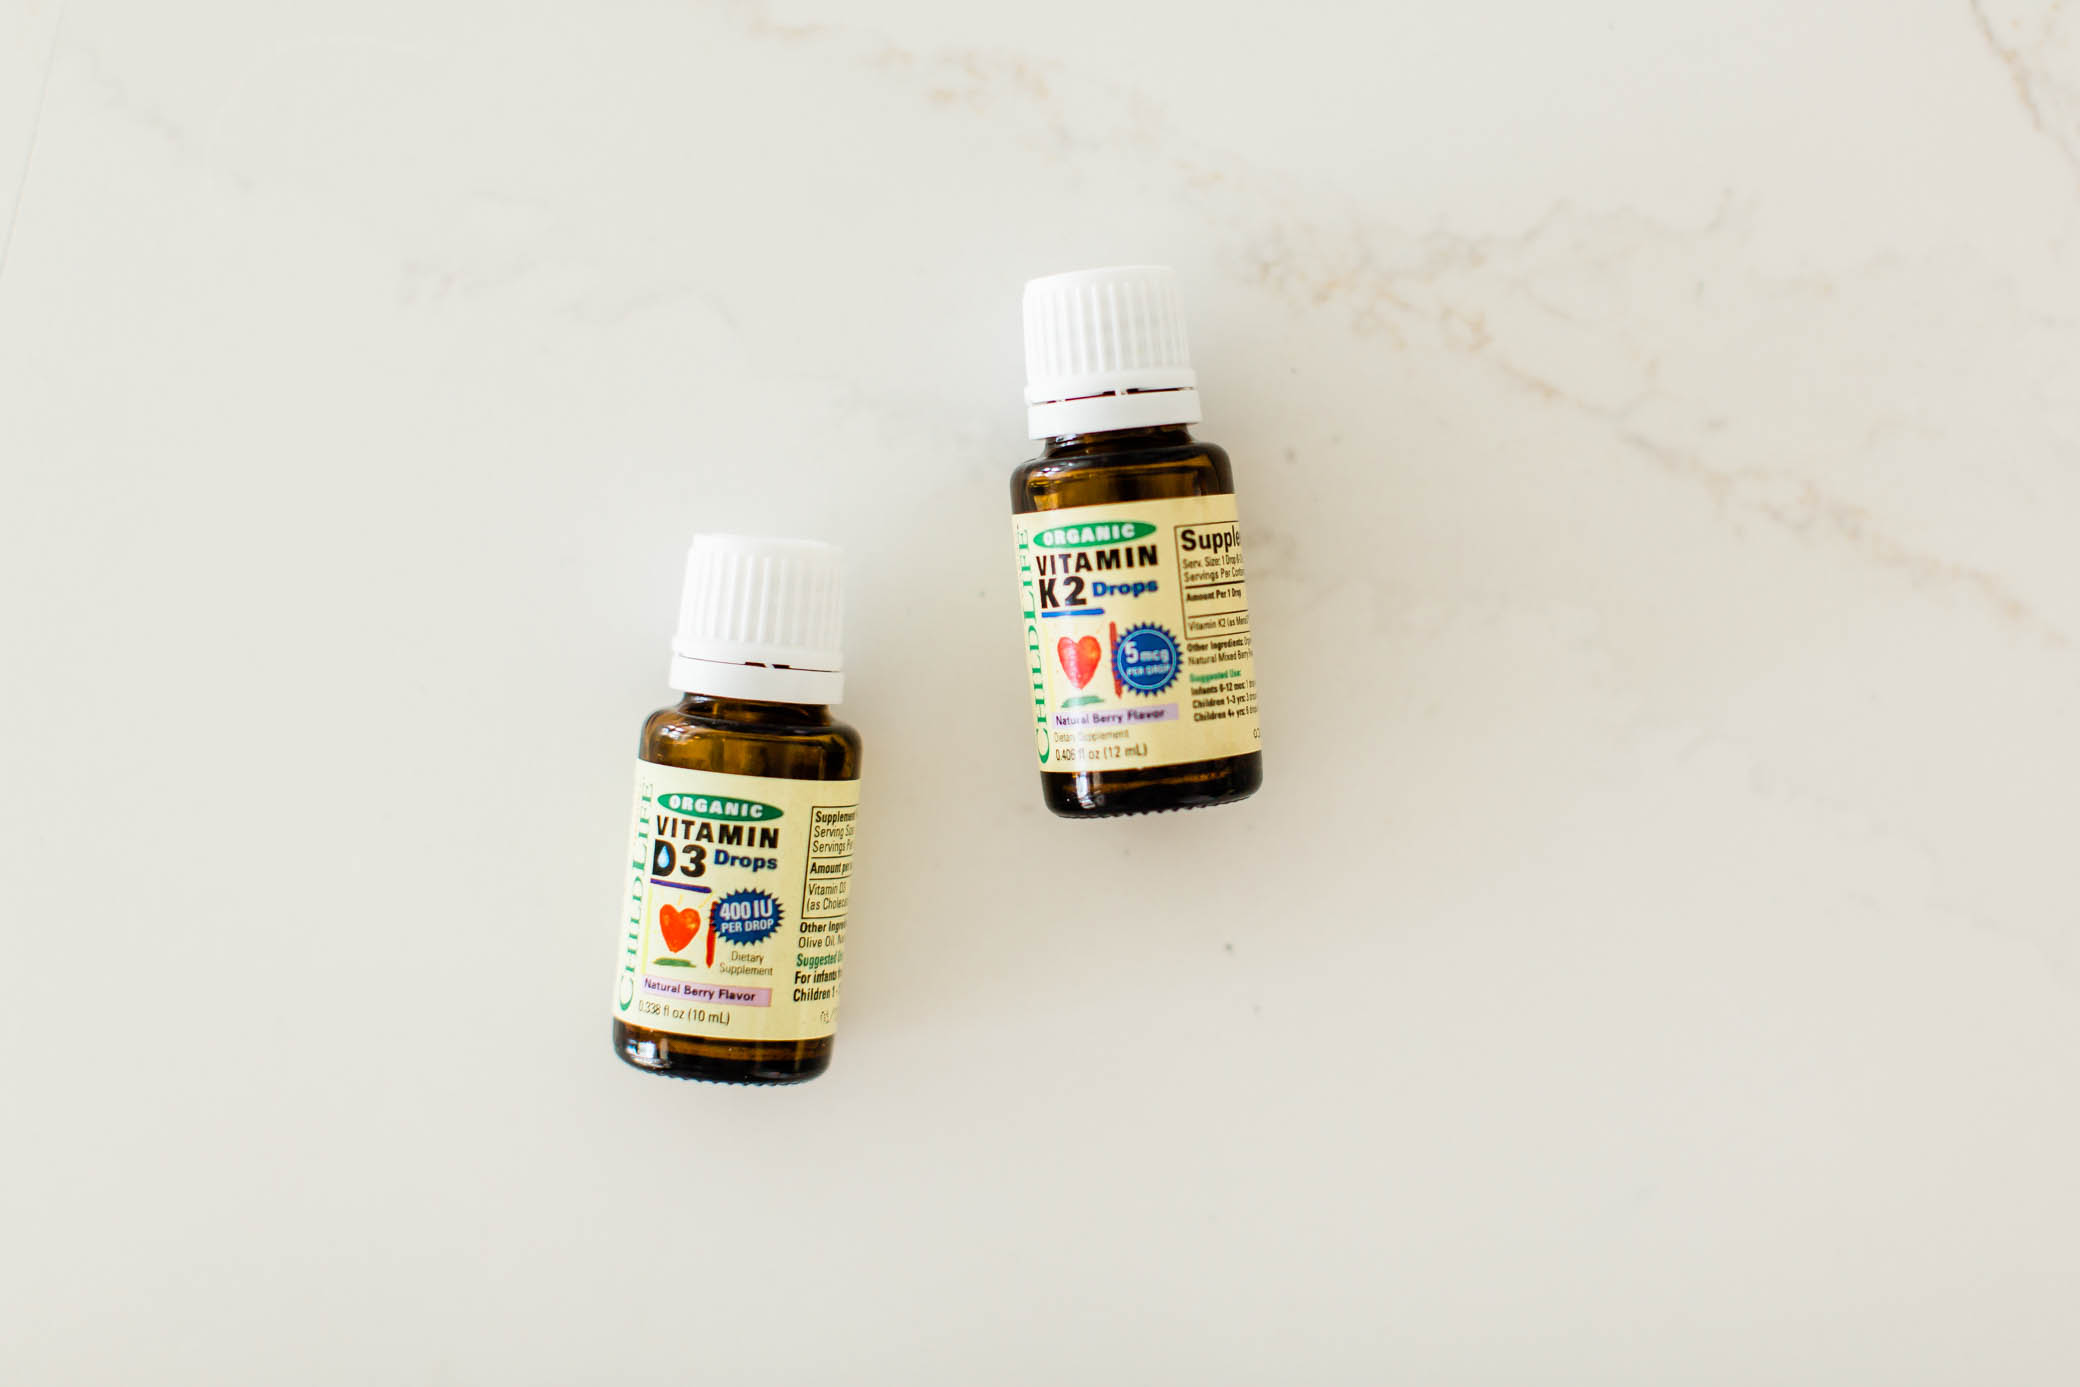 Vitamin D3 and Vitamin K2 from ChildLife Essentials